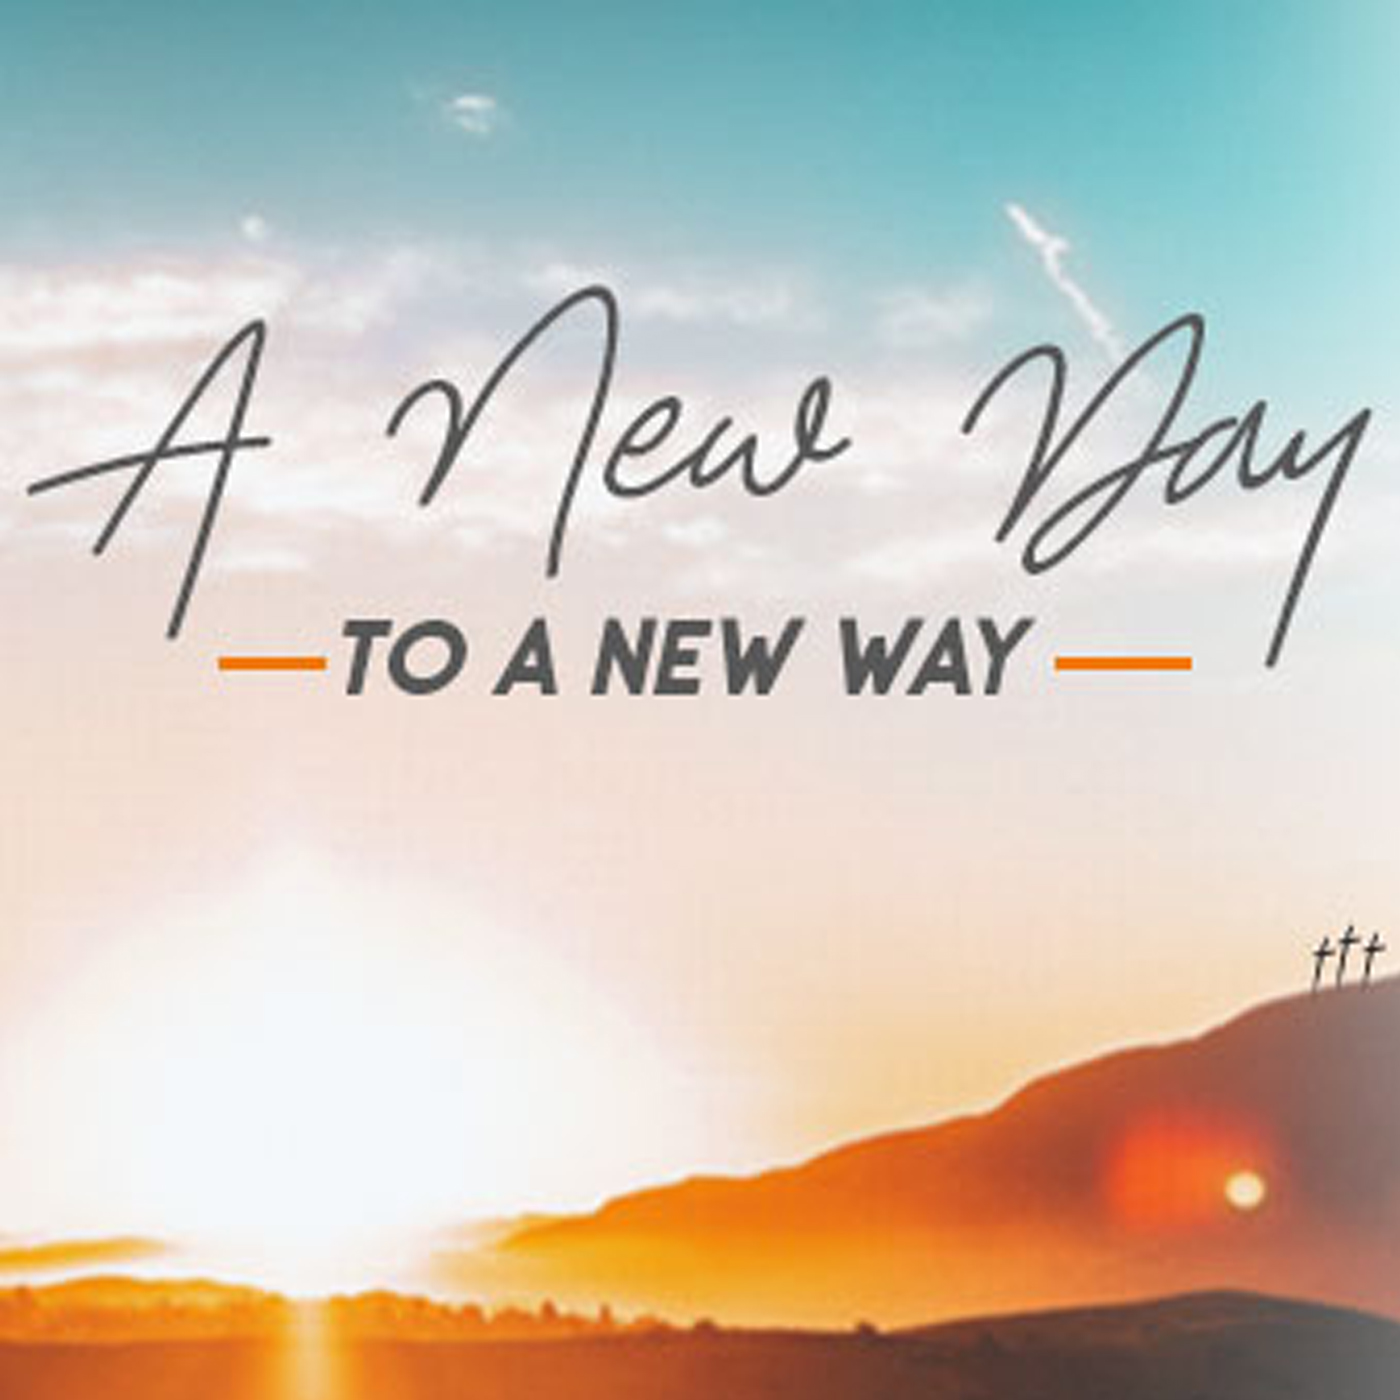 A New Day to a New Way